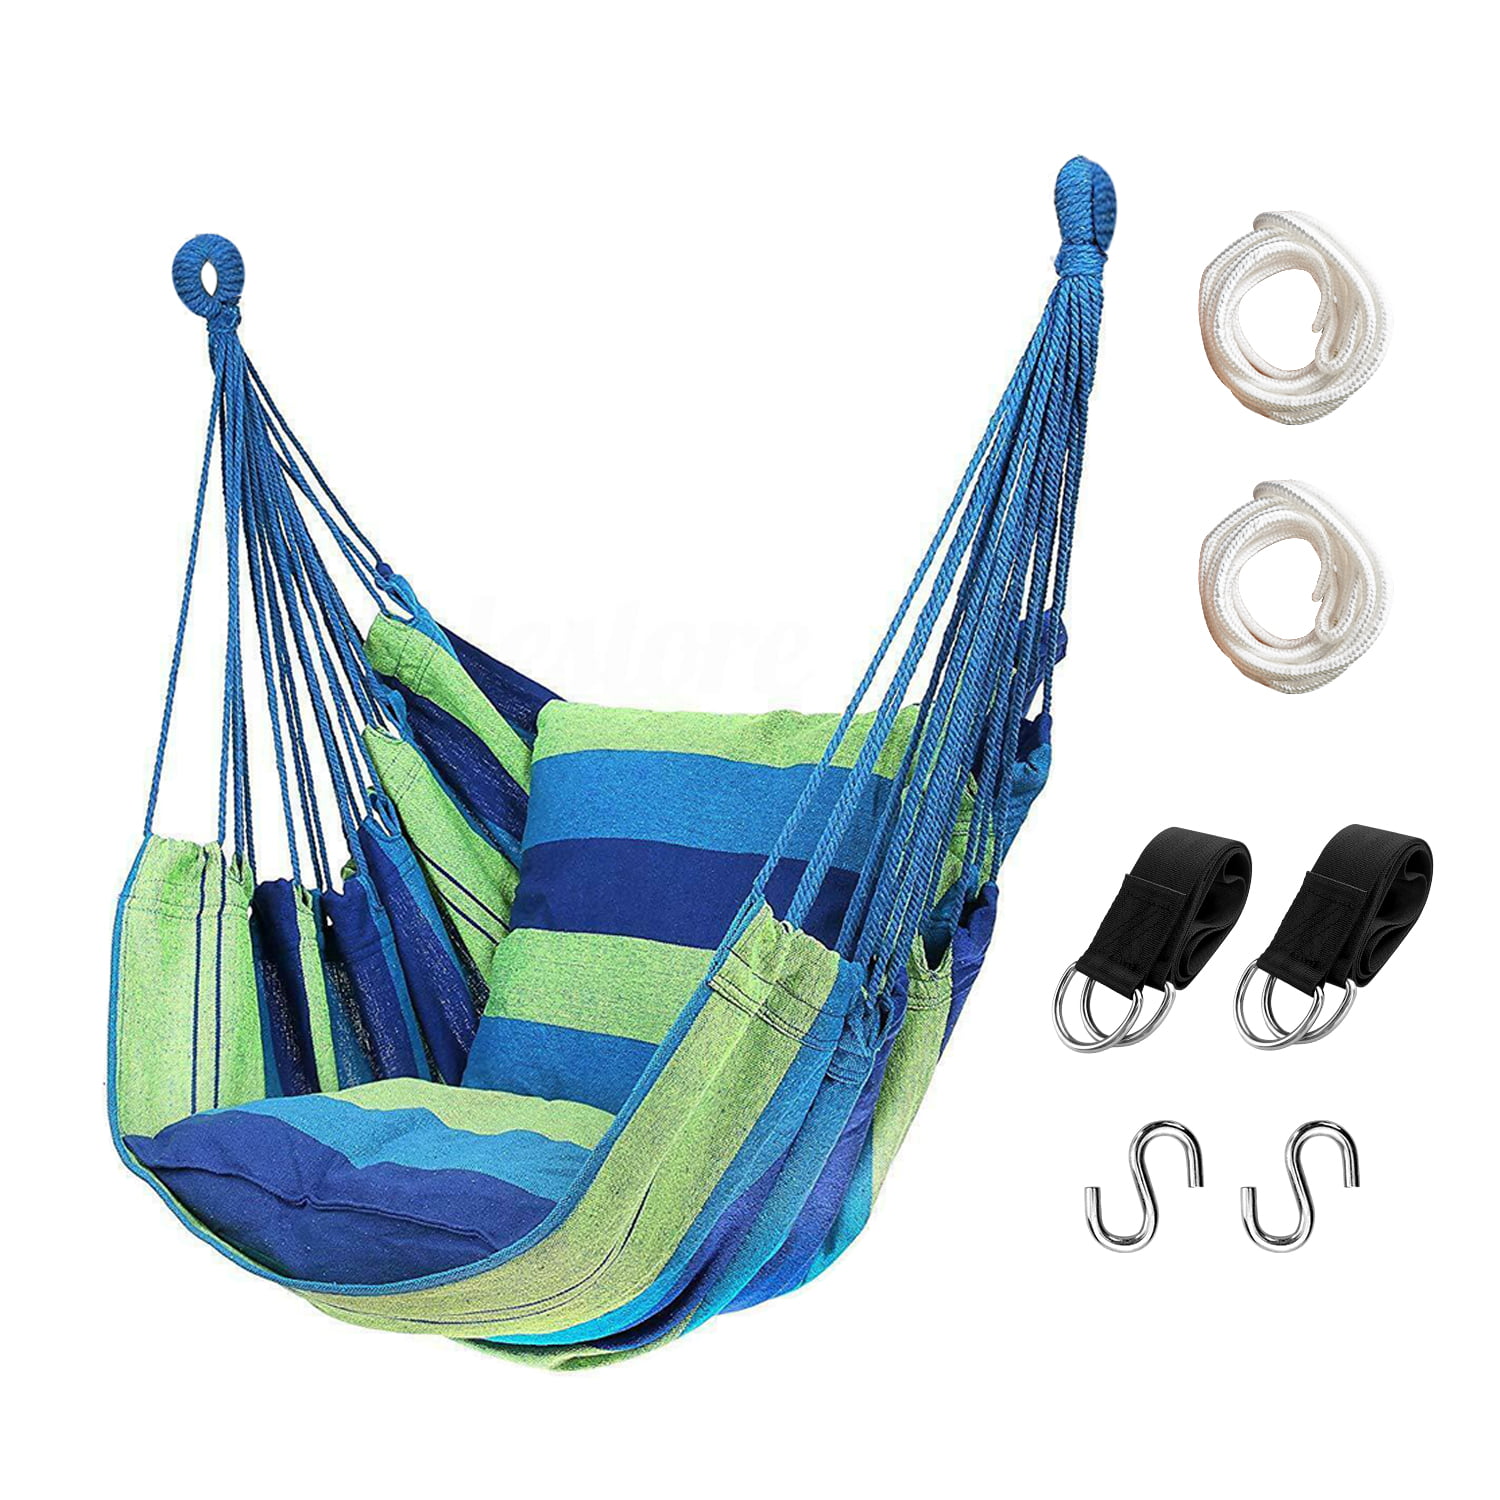 47/4ft BeneLabel Hanging Kits Hammock Chair Hardware 360° Rotation Heavy Duty Swing Hanger with Chain for Indoor Outdoor Playground Hanging Hammock Chair Punching Bags 2 Screws 600 LB Capacity 